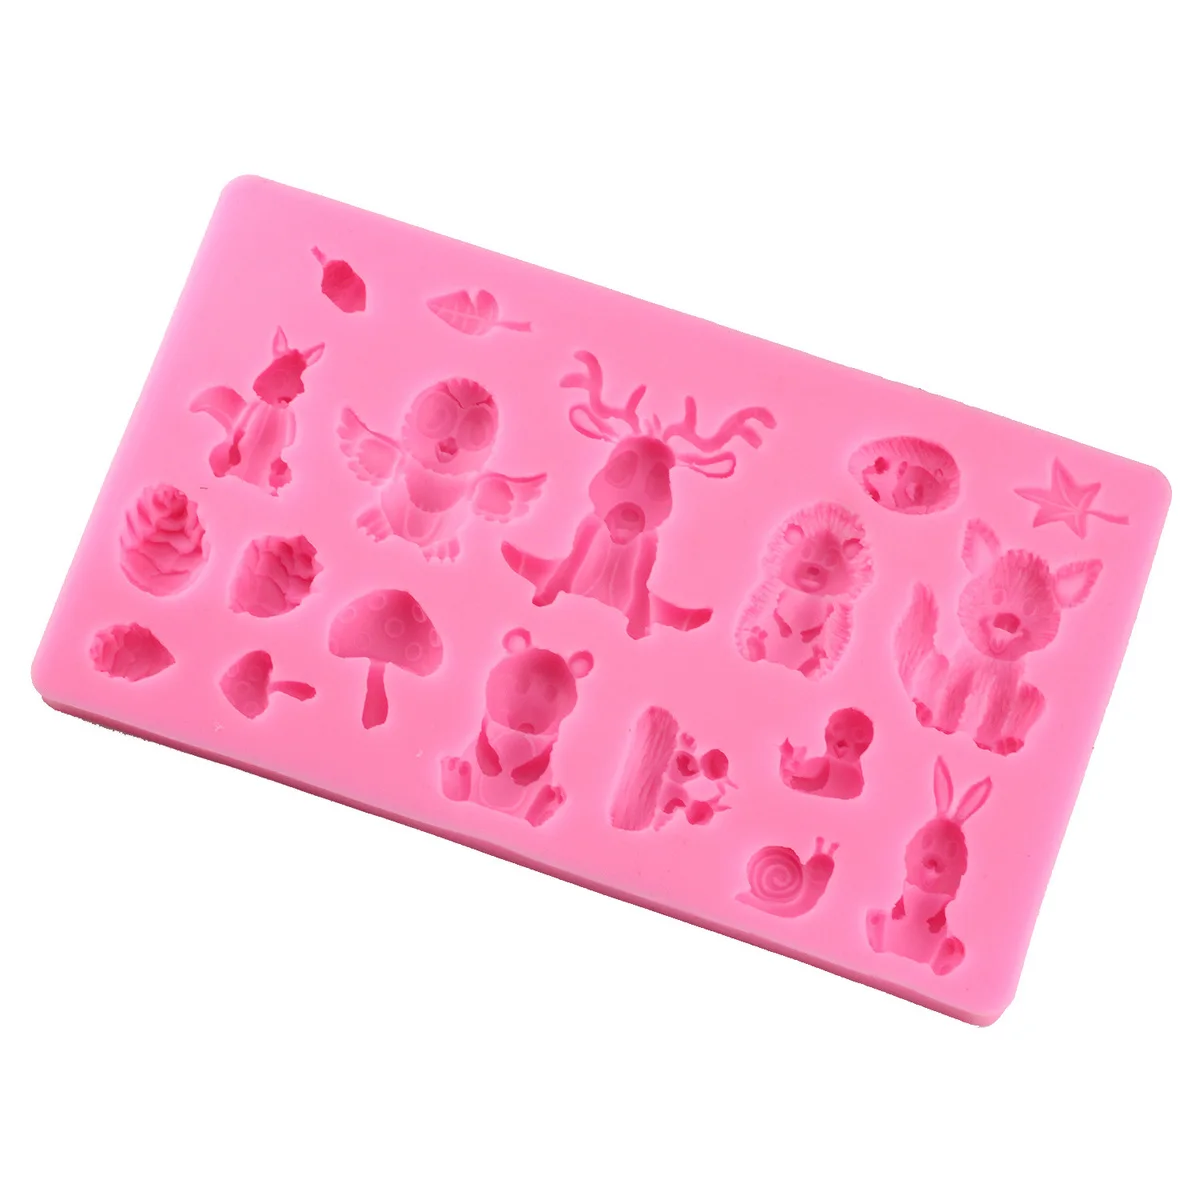 Mujiang Animals Chocolate Fondant Molds Baby Birthday Cake Decorating Tools Cake Silicone Baking Mold Candy Fimo Clay Moulds